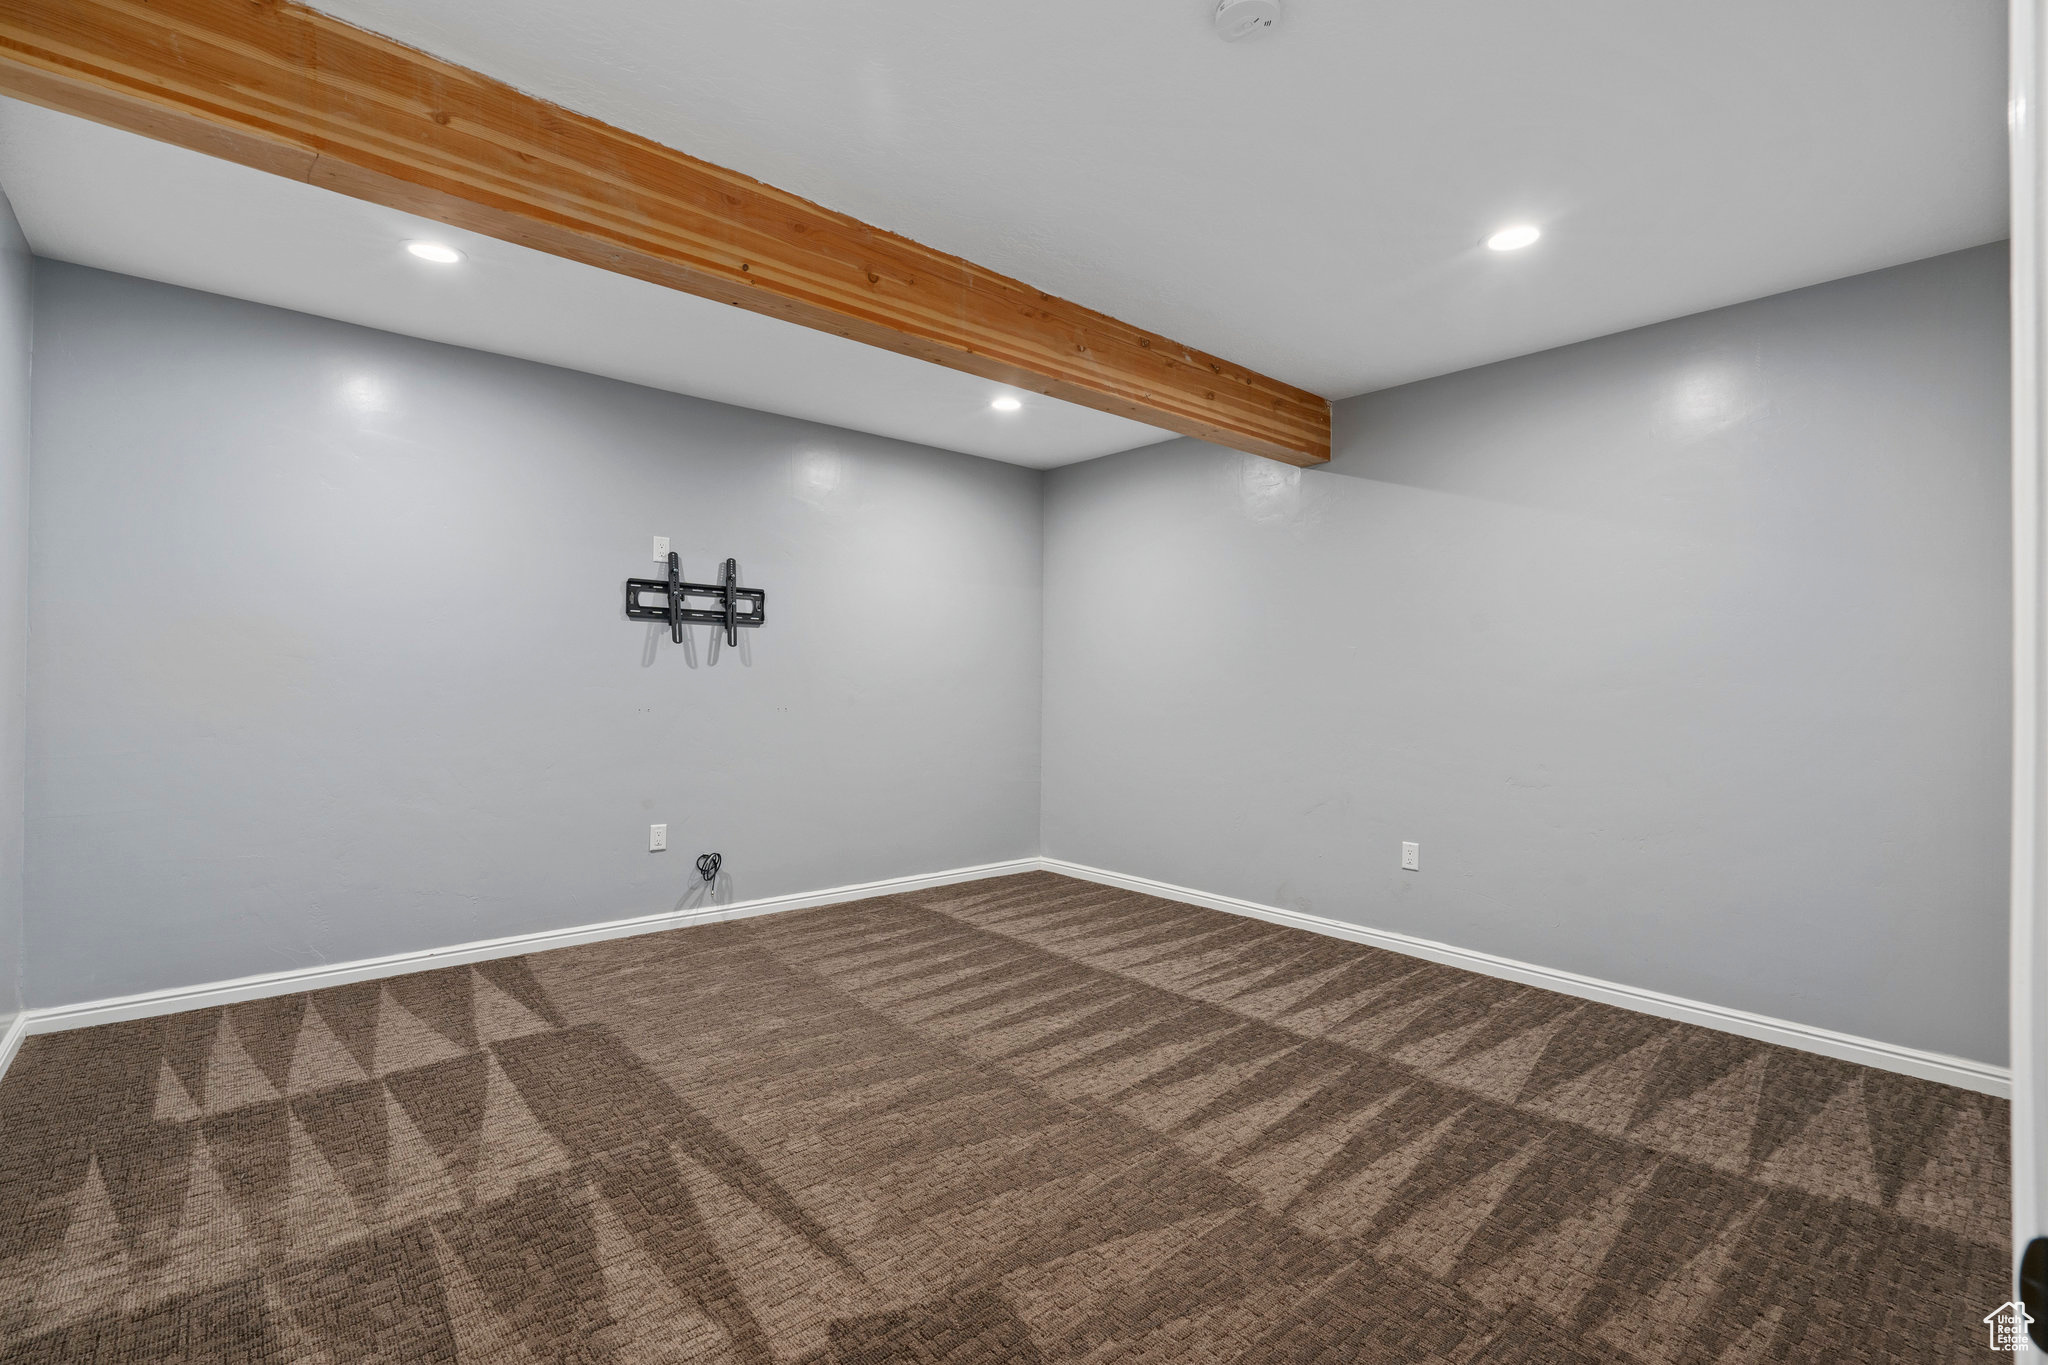 Windowless room--TV room, Gym, Theater, Study? You decide!